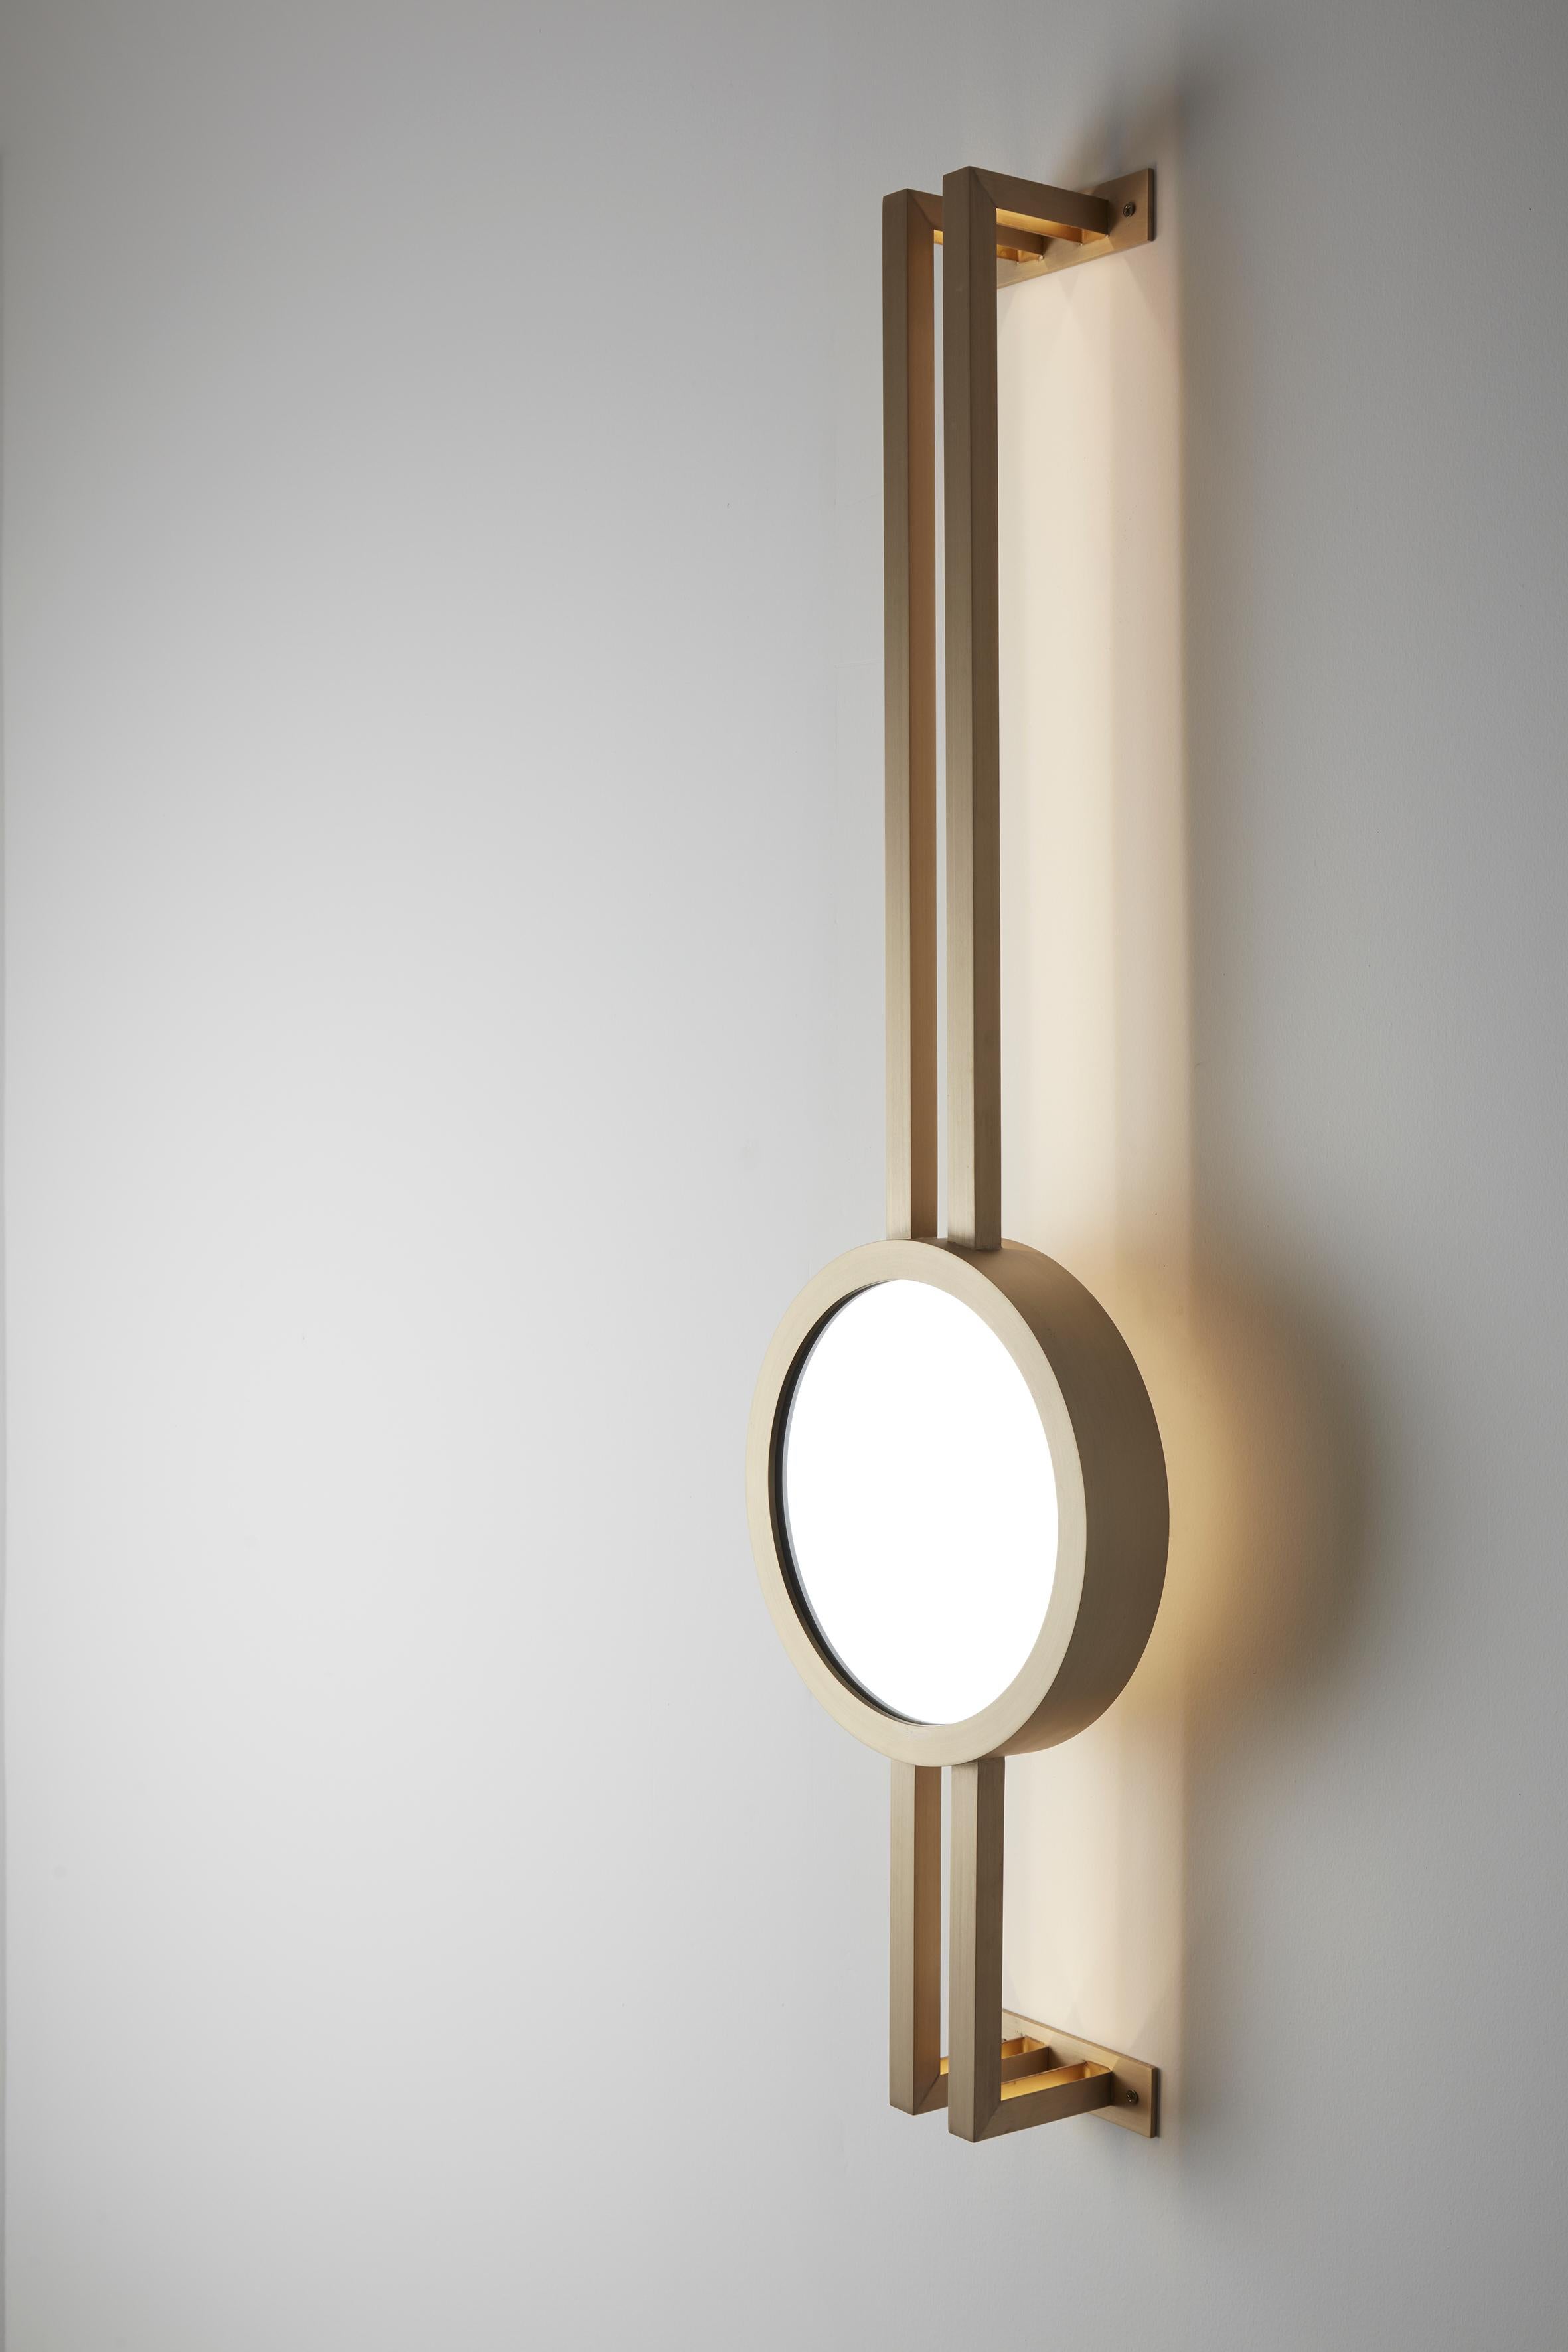 Mandolin wall mounted brass - Carla Baz
Dimensions: ø 29 x H 110 x D 13 cm
Weight: 6 kg
Material: Brass

Mandolin evokes intimacy and warmth. Just like a serenade is meant for a special person, these backlit mirrors are intended to furtively